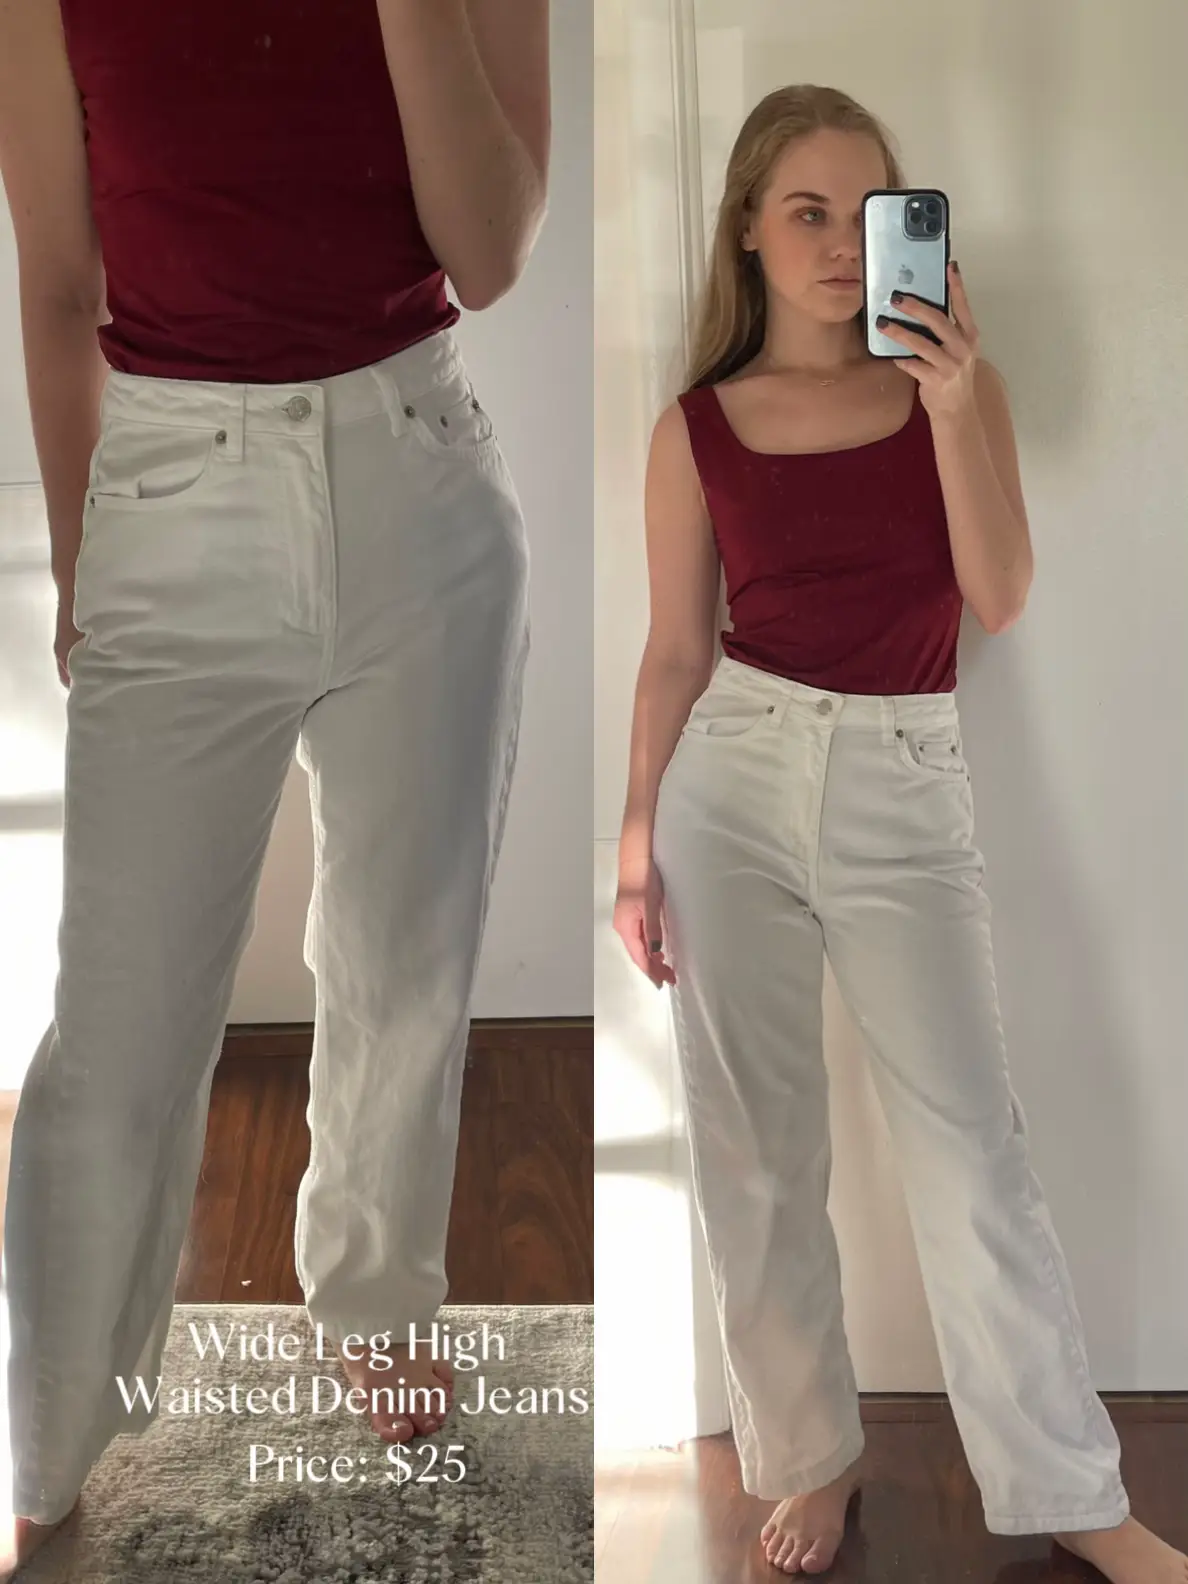 Scarlet Off White High Rise Straight Leg Jeans